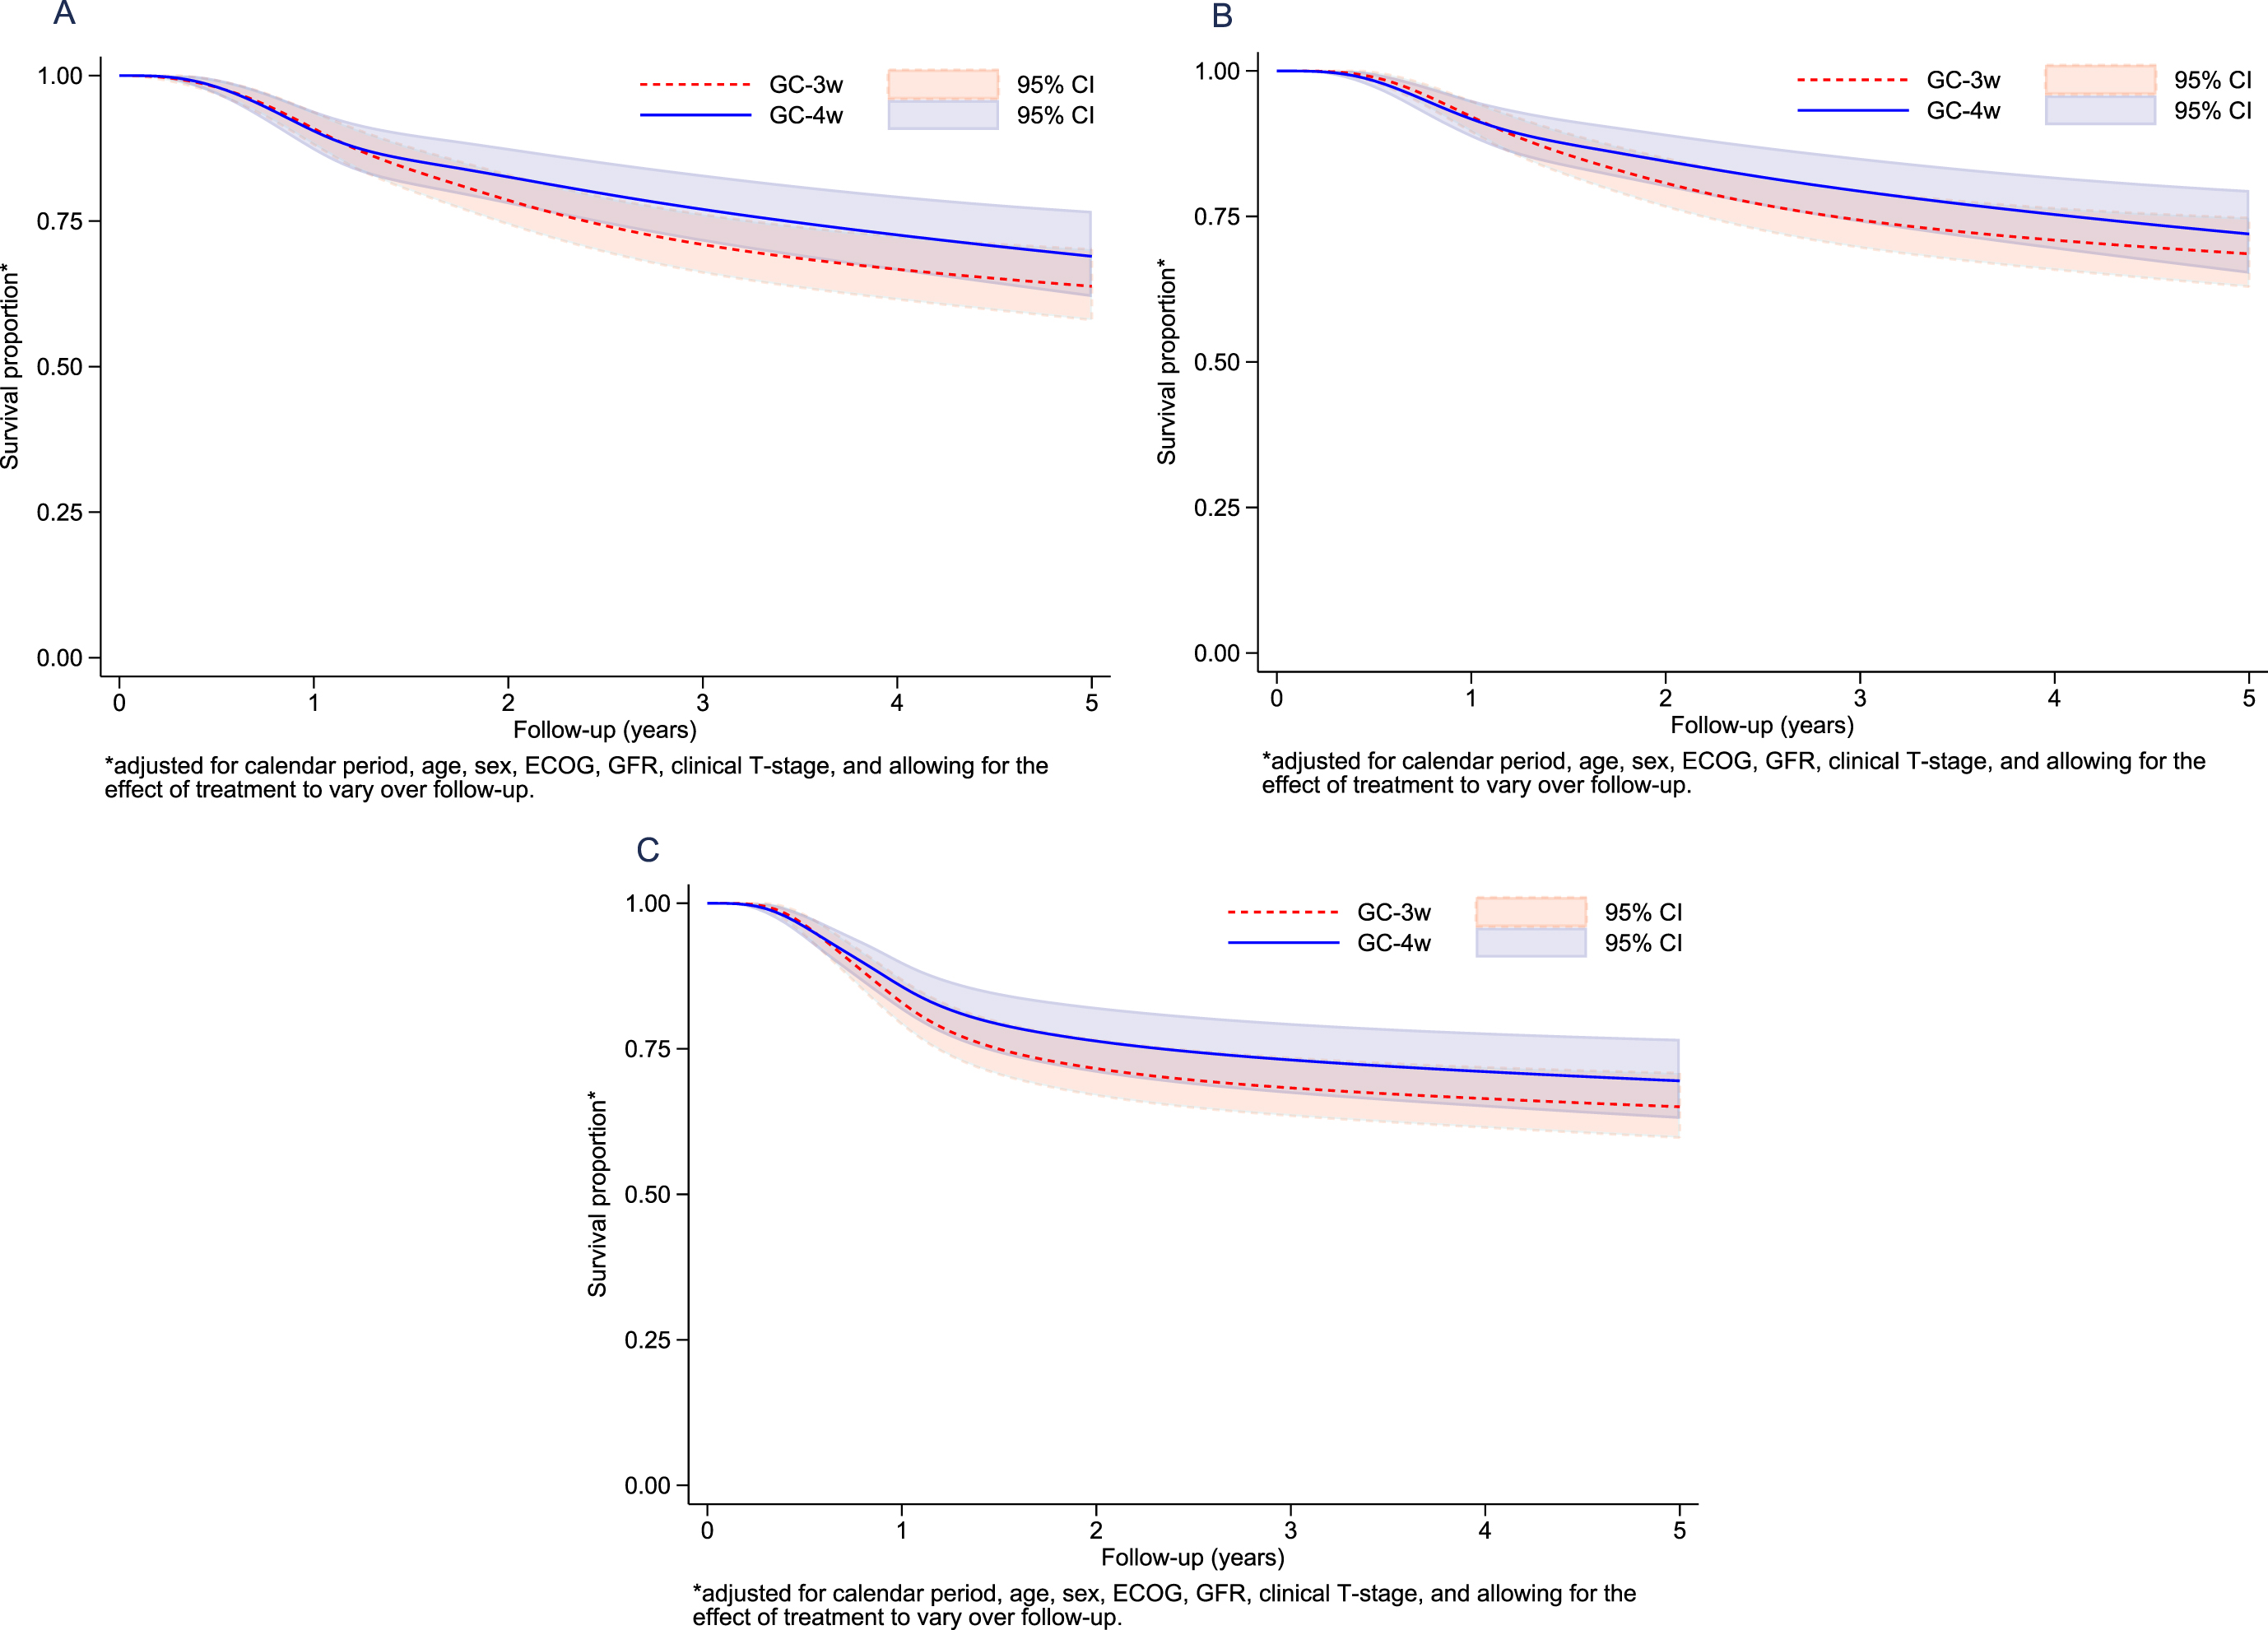 Adjusted overall survival (A), adjusted bladder-cancer-specific survival (B), and adjusted relapse-free survival (C) for GC-4w versus GC-3w standardized for calendar period, age, sex, ECOG, GFR, and clinical T-stage, allowing for the effectof treatment to vary overthe follow-up period.